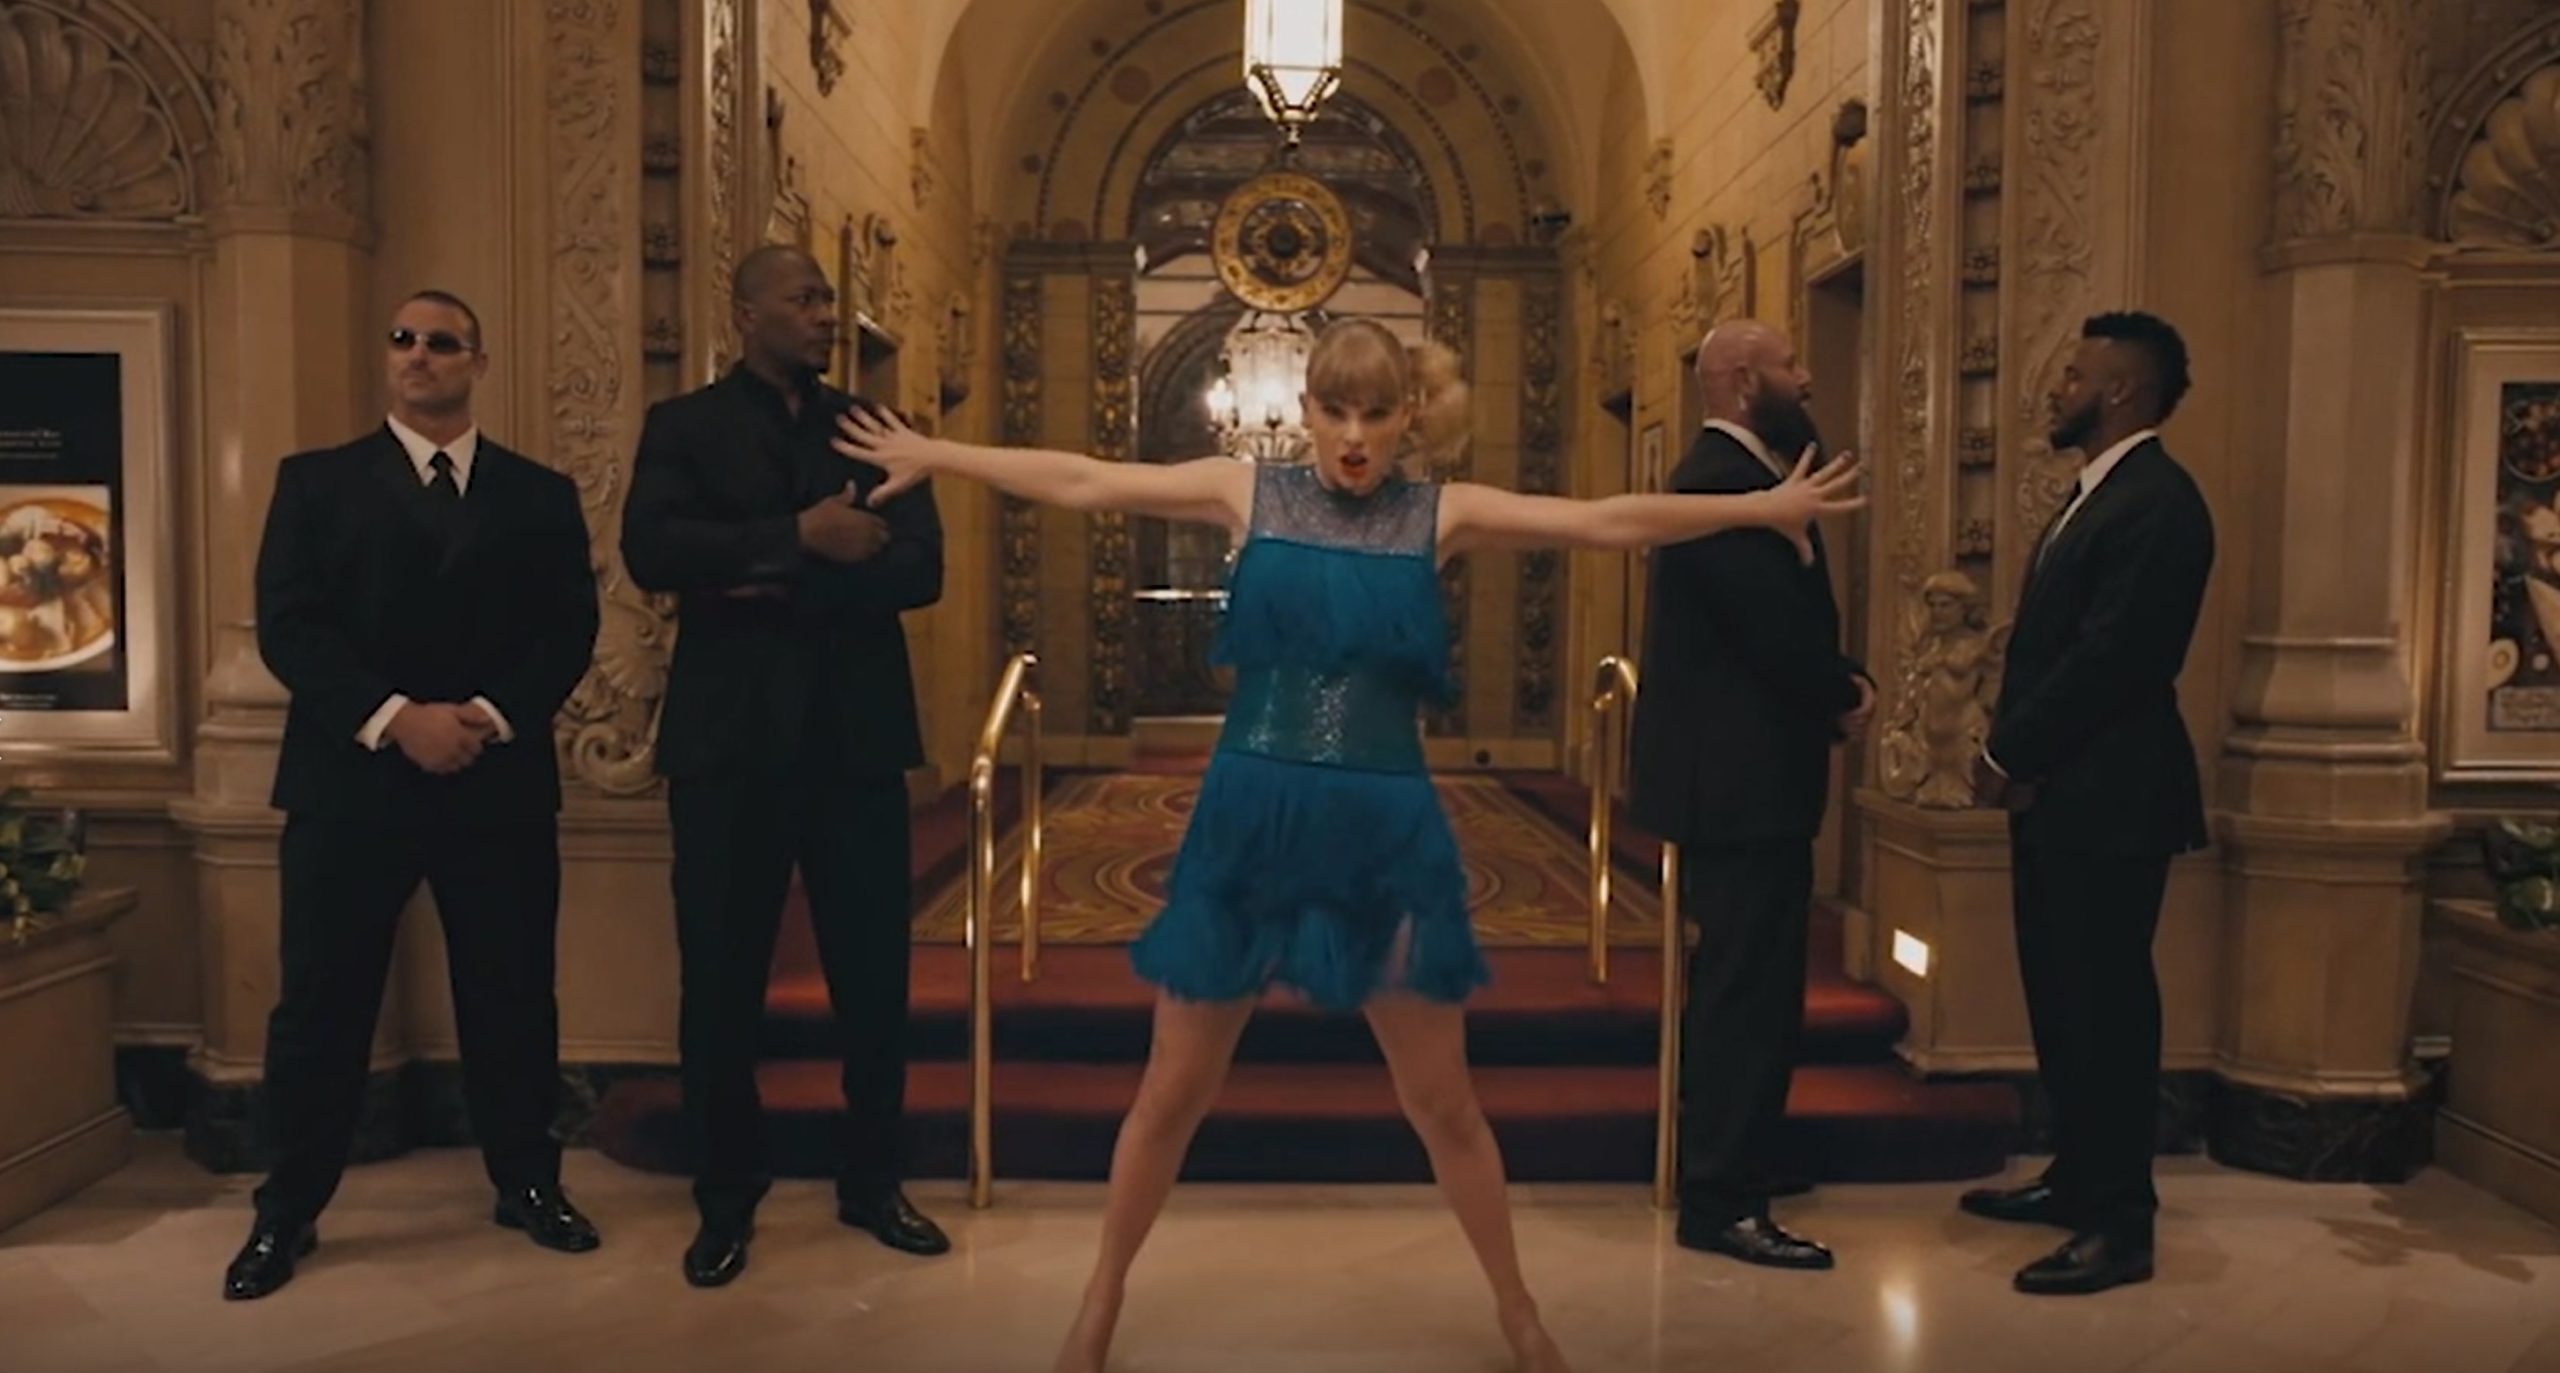 Taylor Swift’s “Delicate” Filming Locations